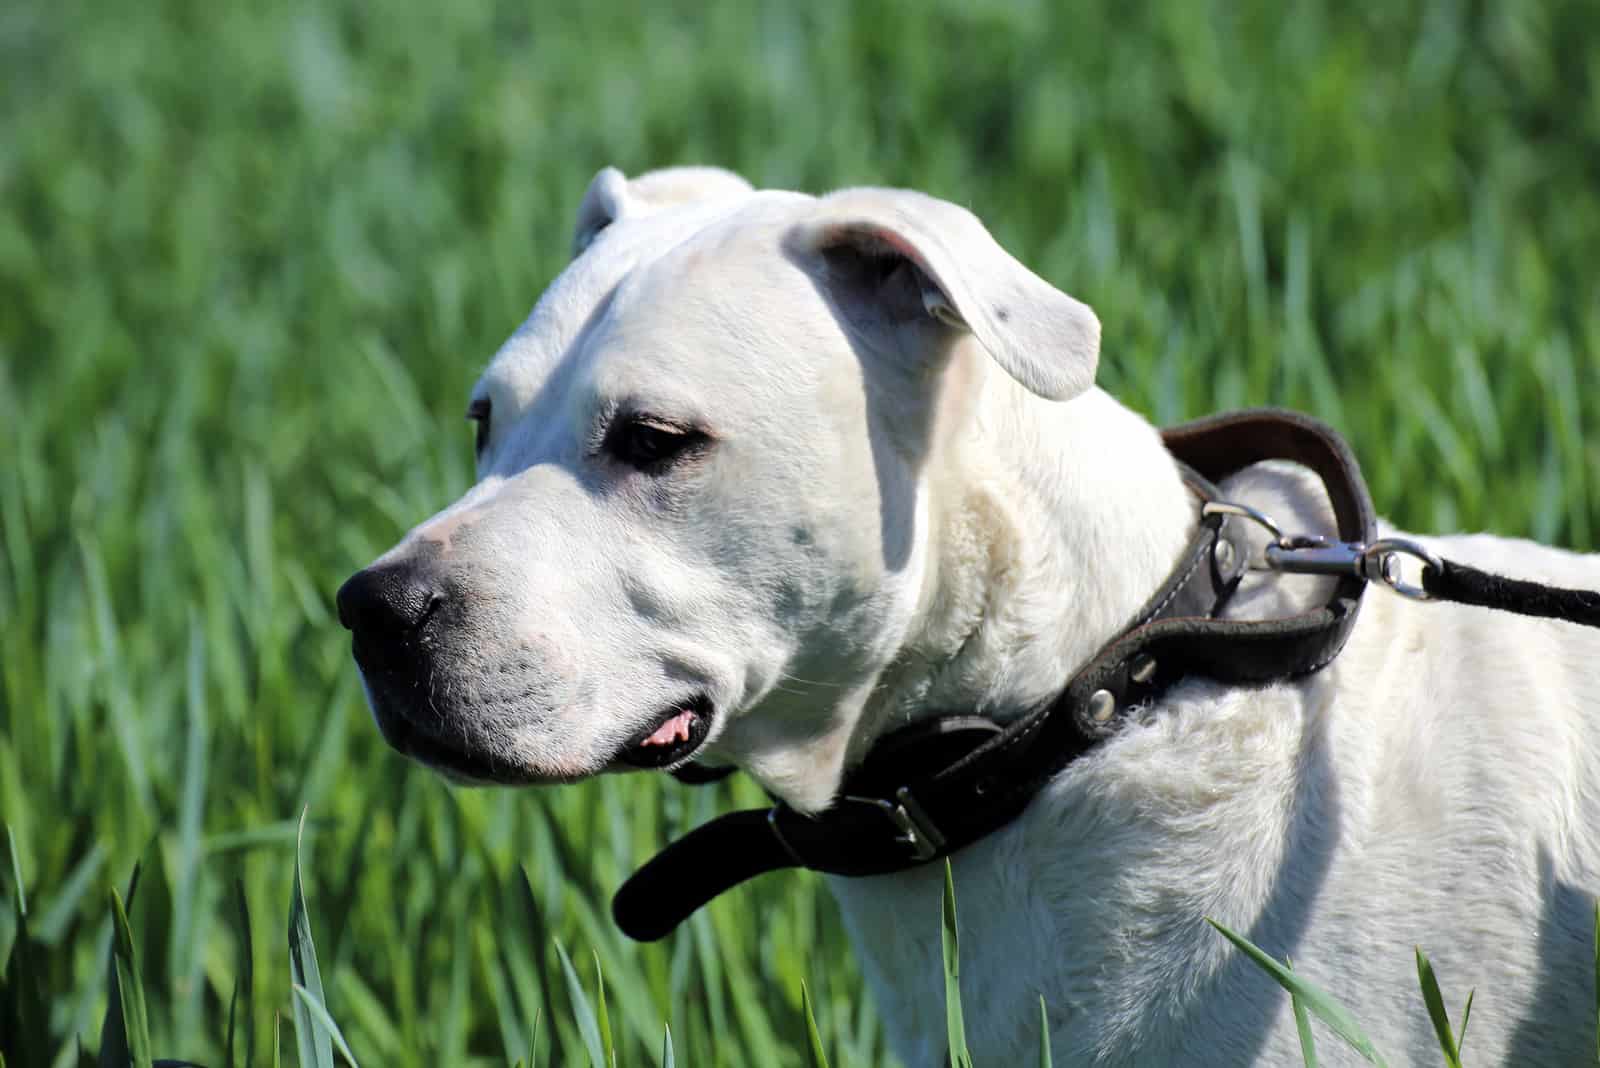 Dogo Argentino standing on grass looking away